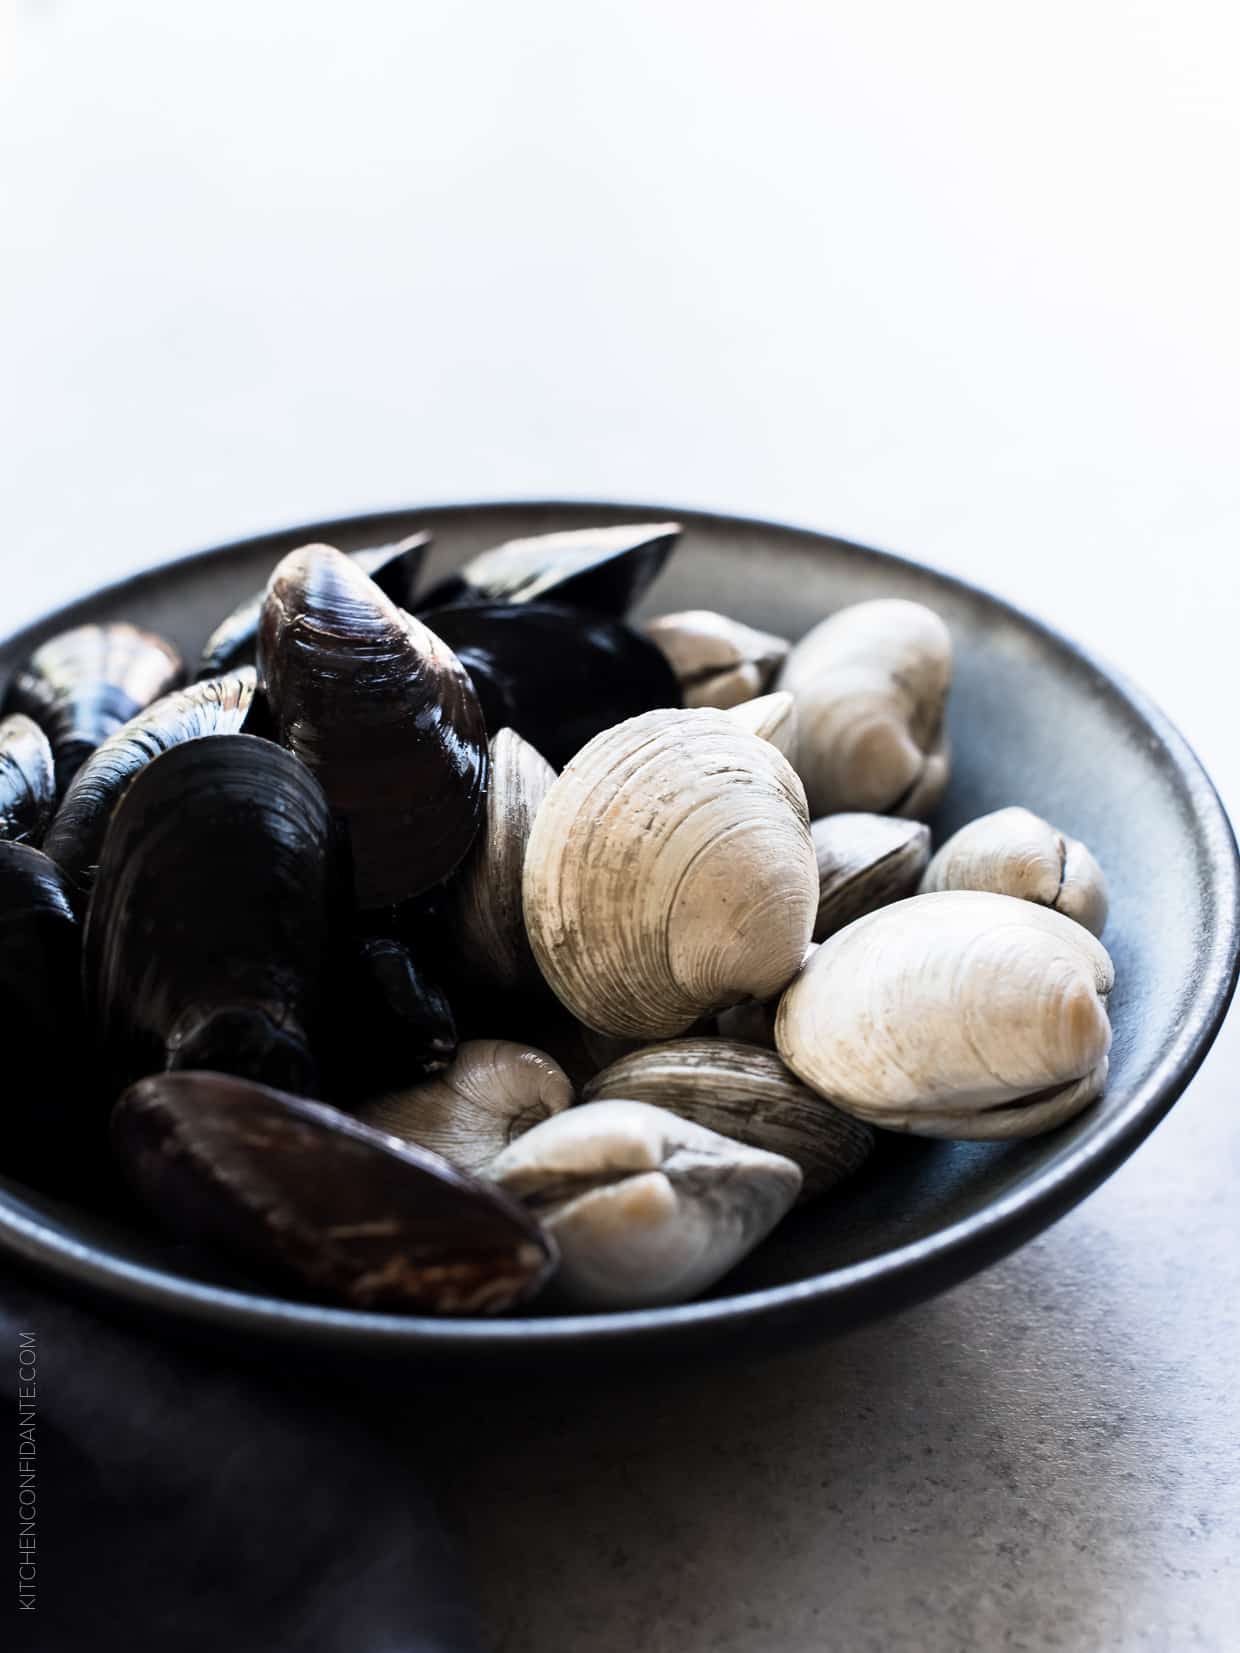 Fresh clams and mussels in a bowl on a rustic surface.